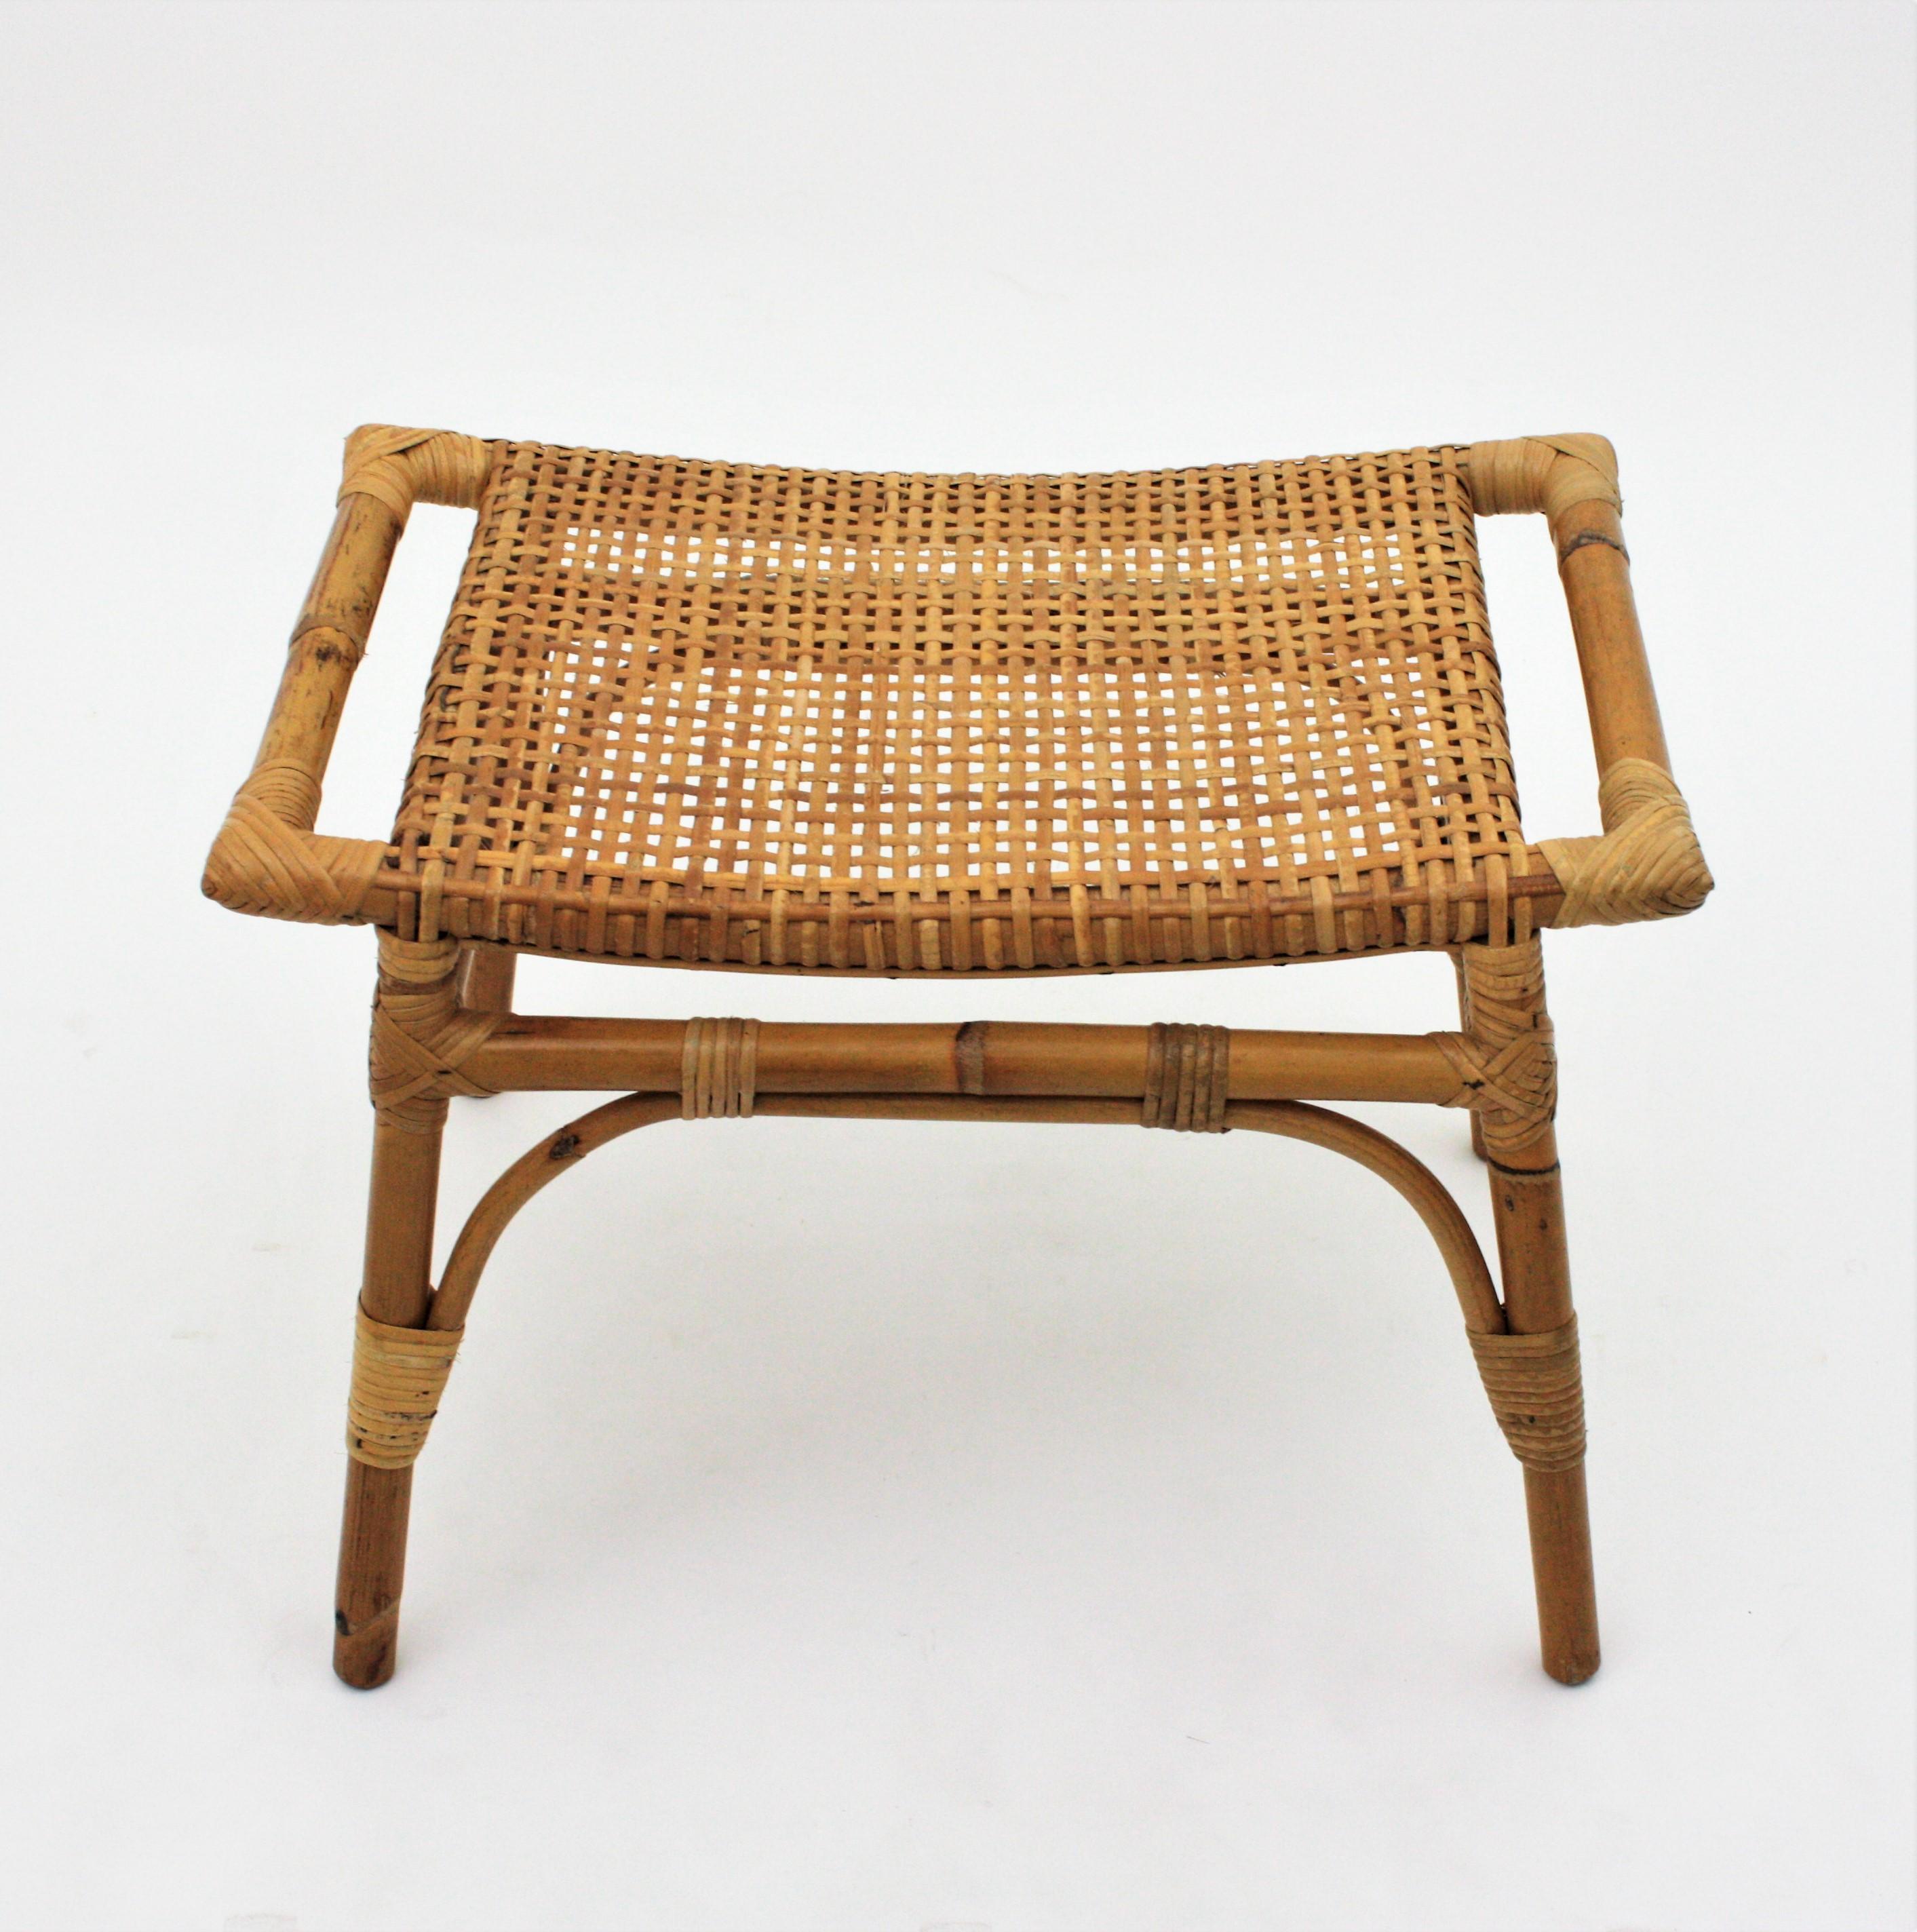 Mid-Century Modern Pair of Bamboo Stools, Benches or Ottoman with Woven Wicker Cane Seats